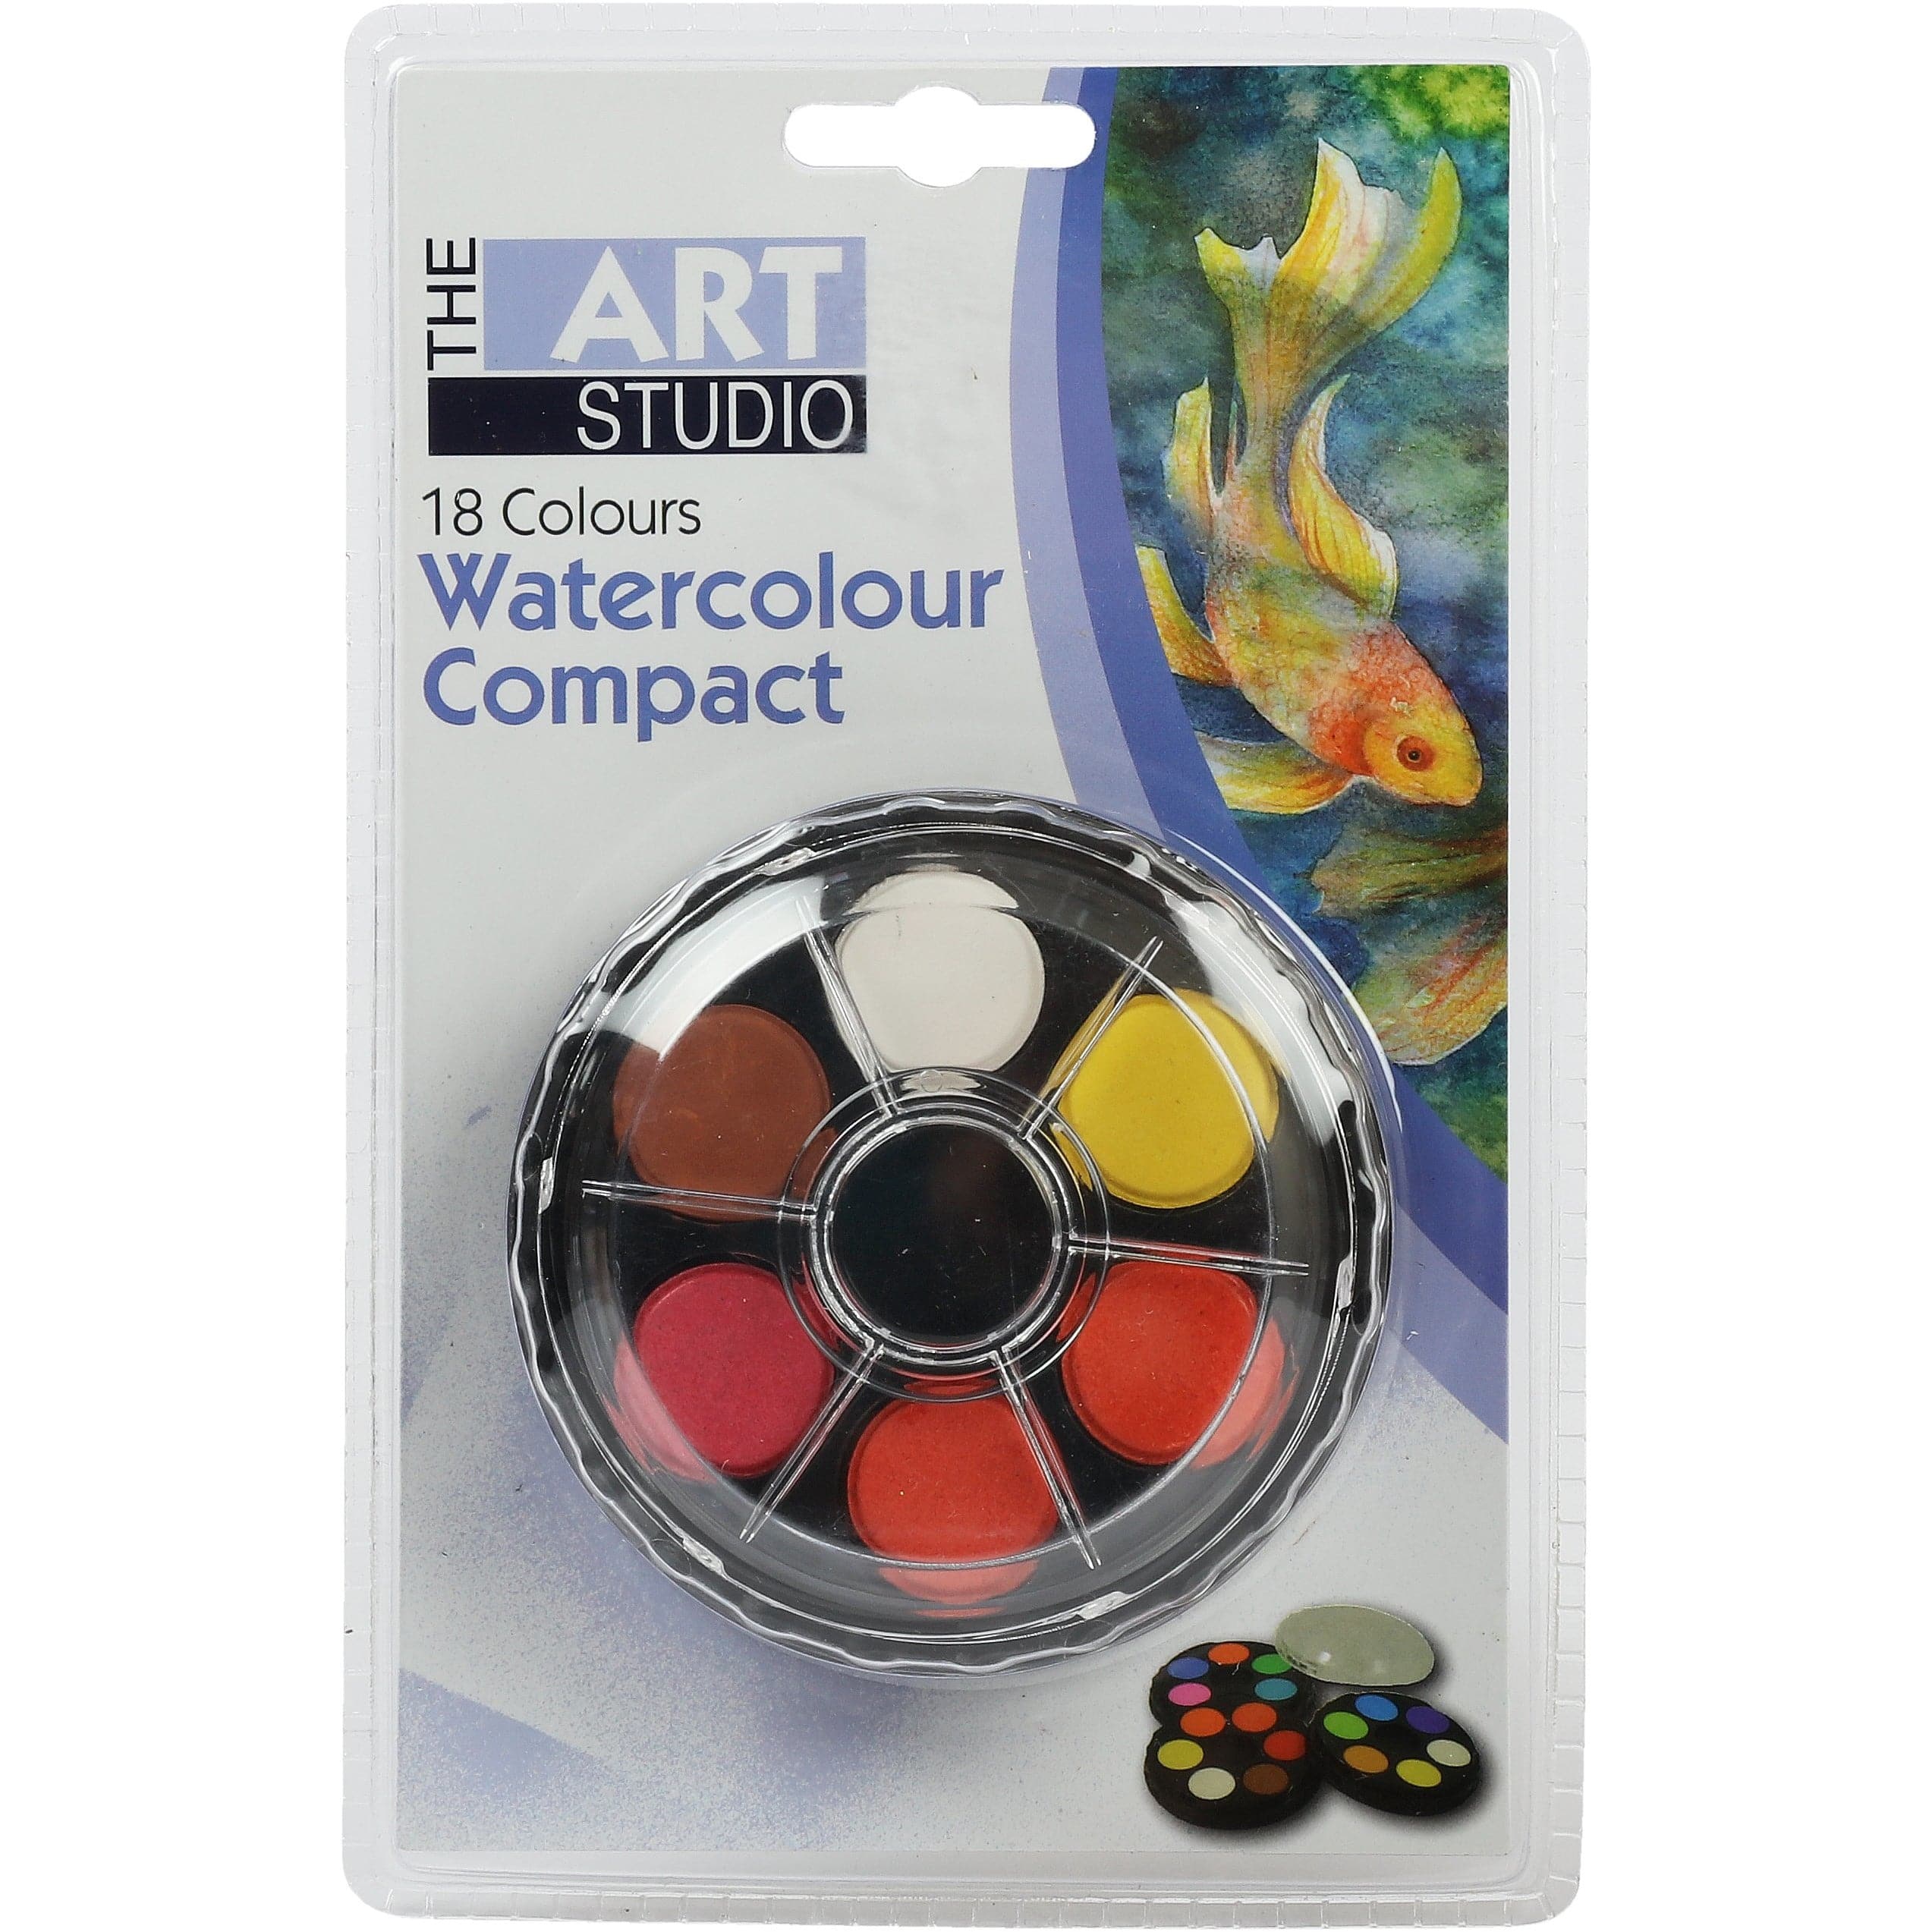 Image of The Art Studio 3 Tier Watercolour Compact 18 Assorted Colours